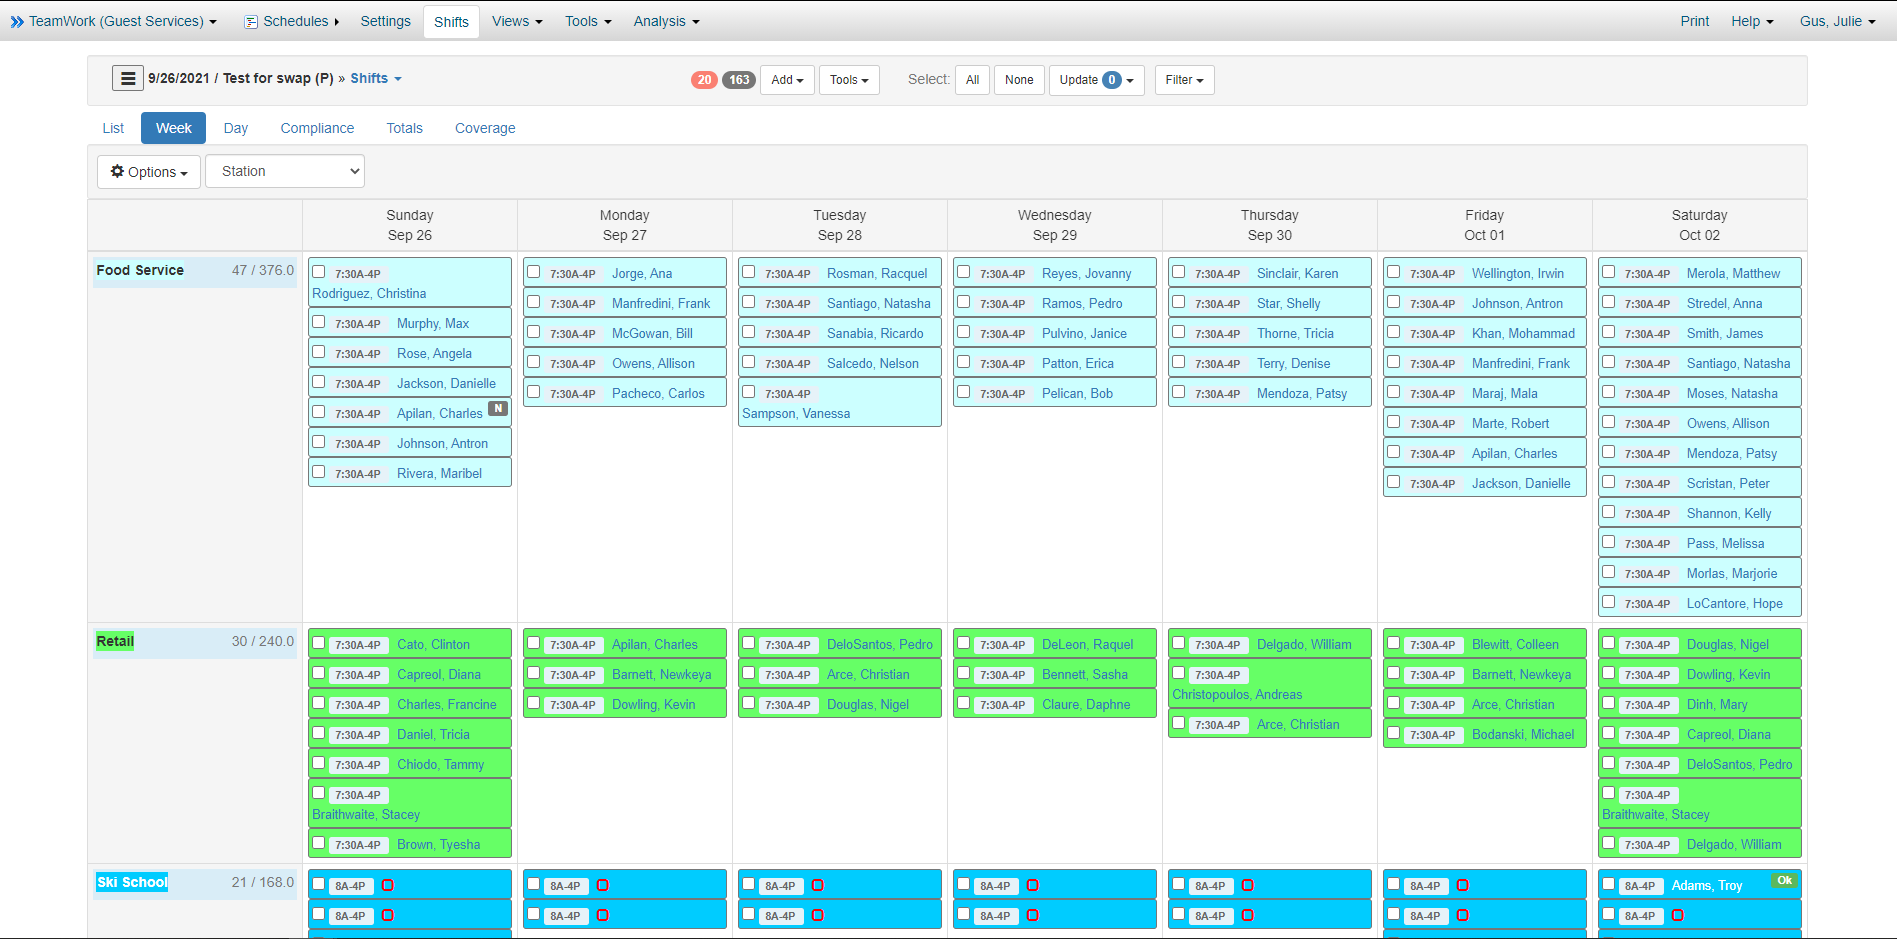 This is a week view of the schedule that has customized style to differentiate the jobs people work.